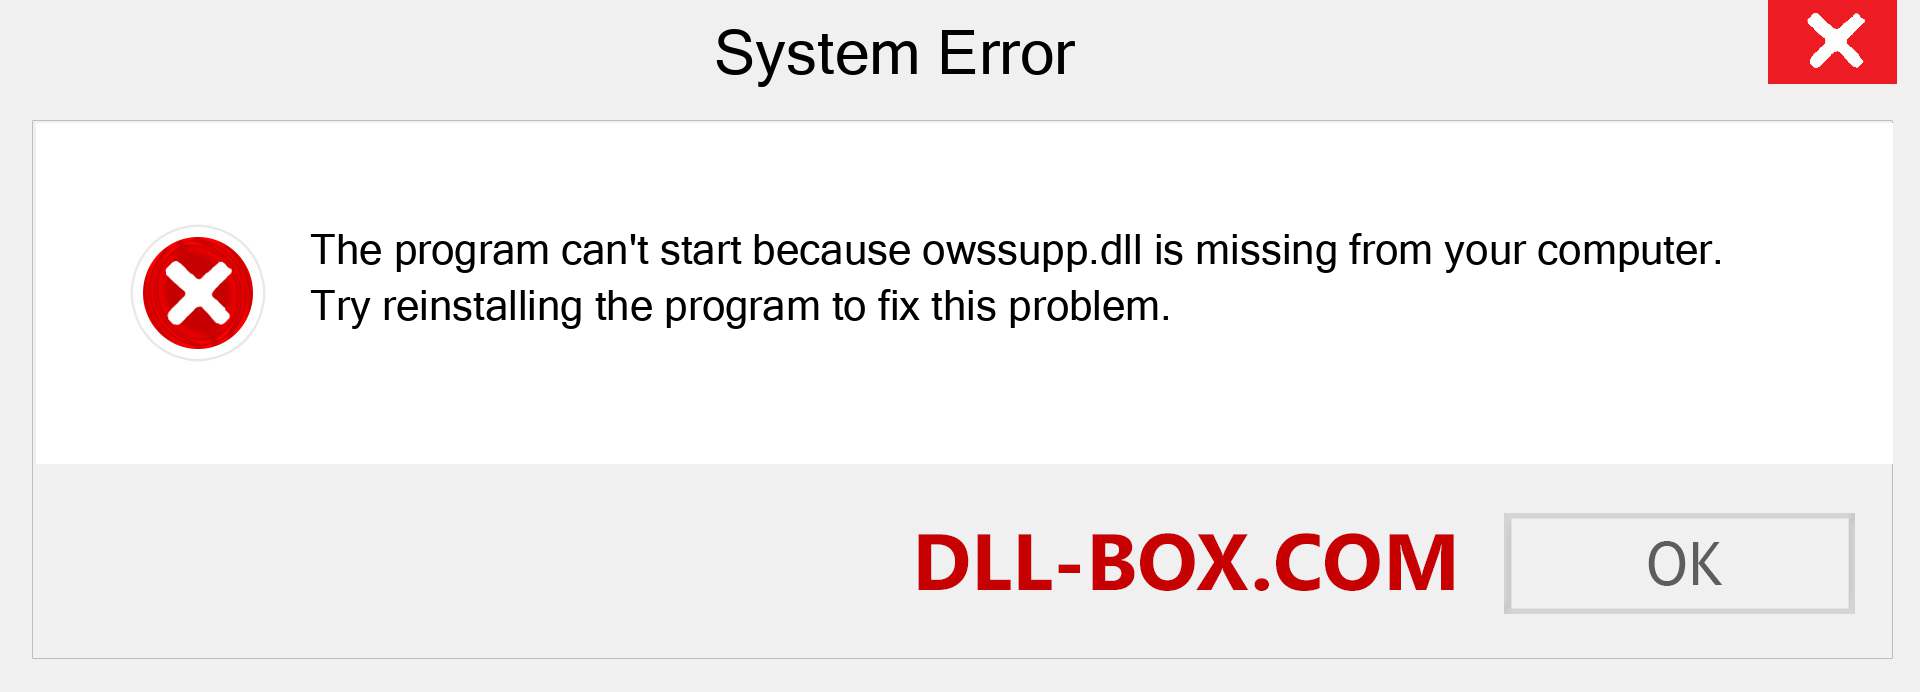  owssupp.dll file is missing?. Download for Windows 7, 8, 10 - Fix  owssupp dll Missing Error on Windows, photos, images